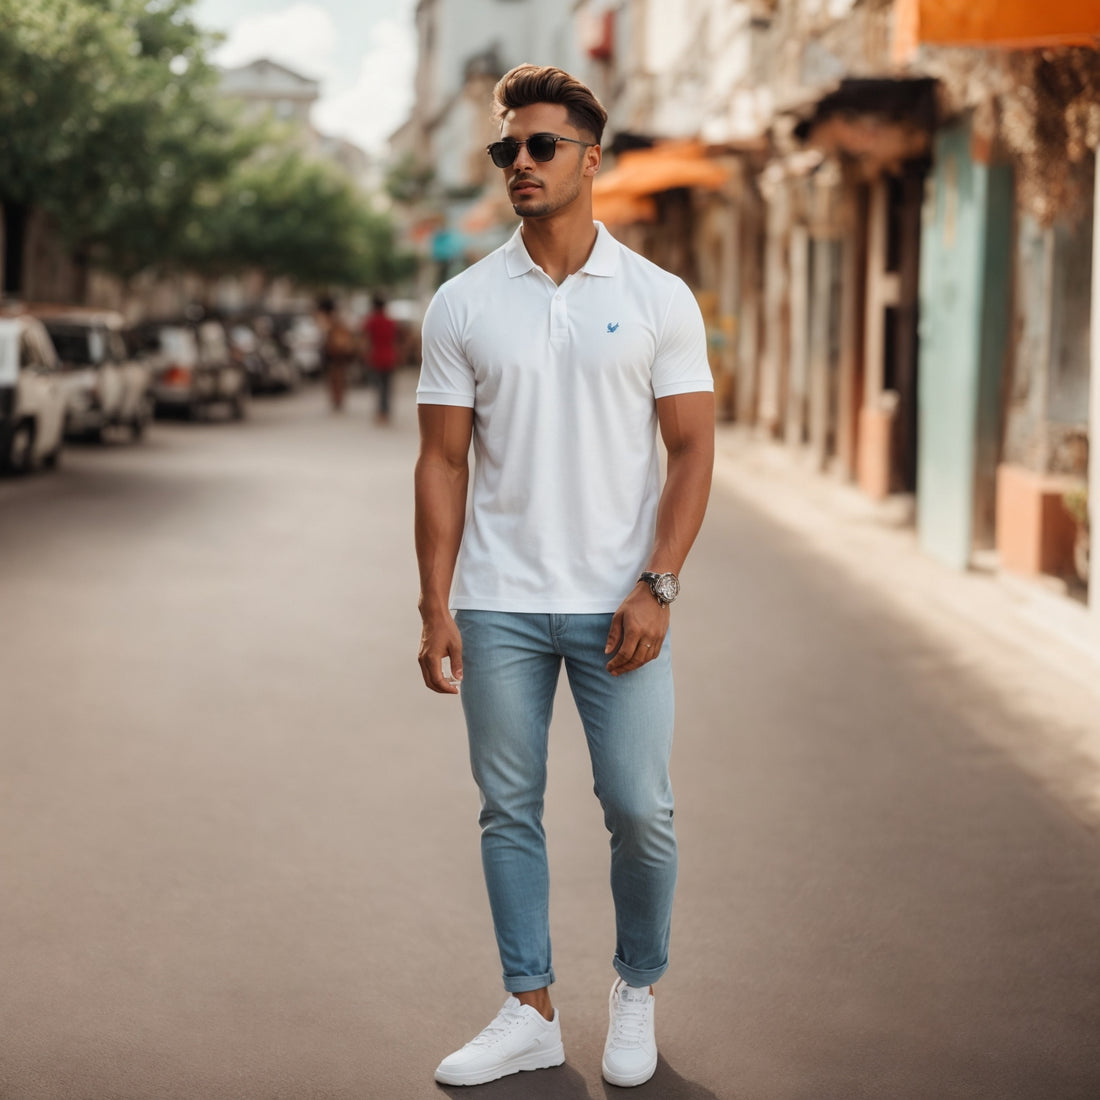 The Stylish Choice: Embrace Summer with a White Polo Shirt for Men